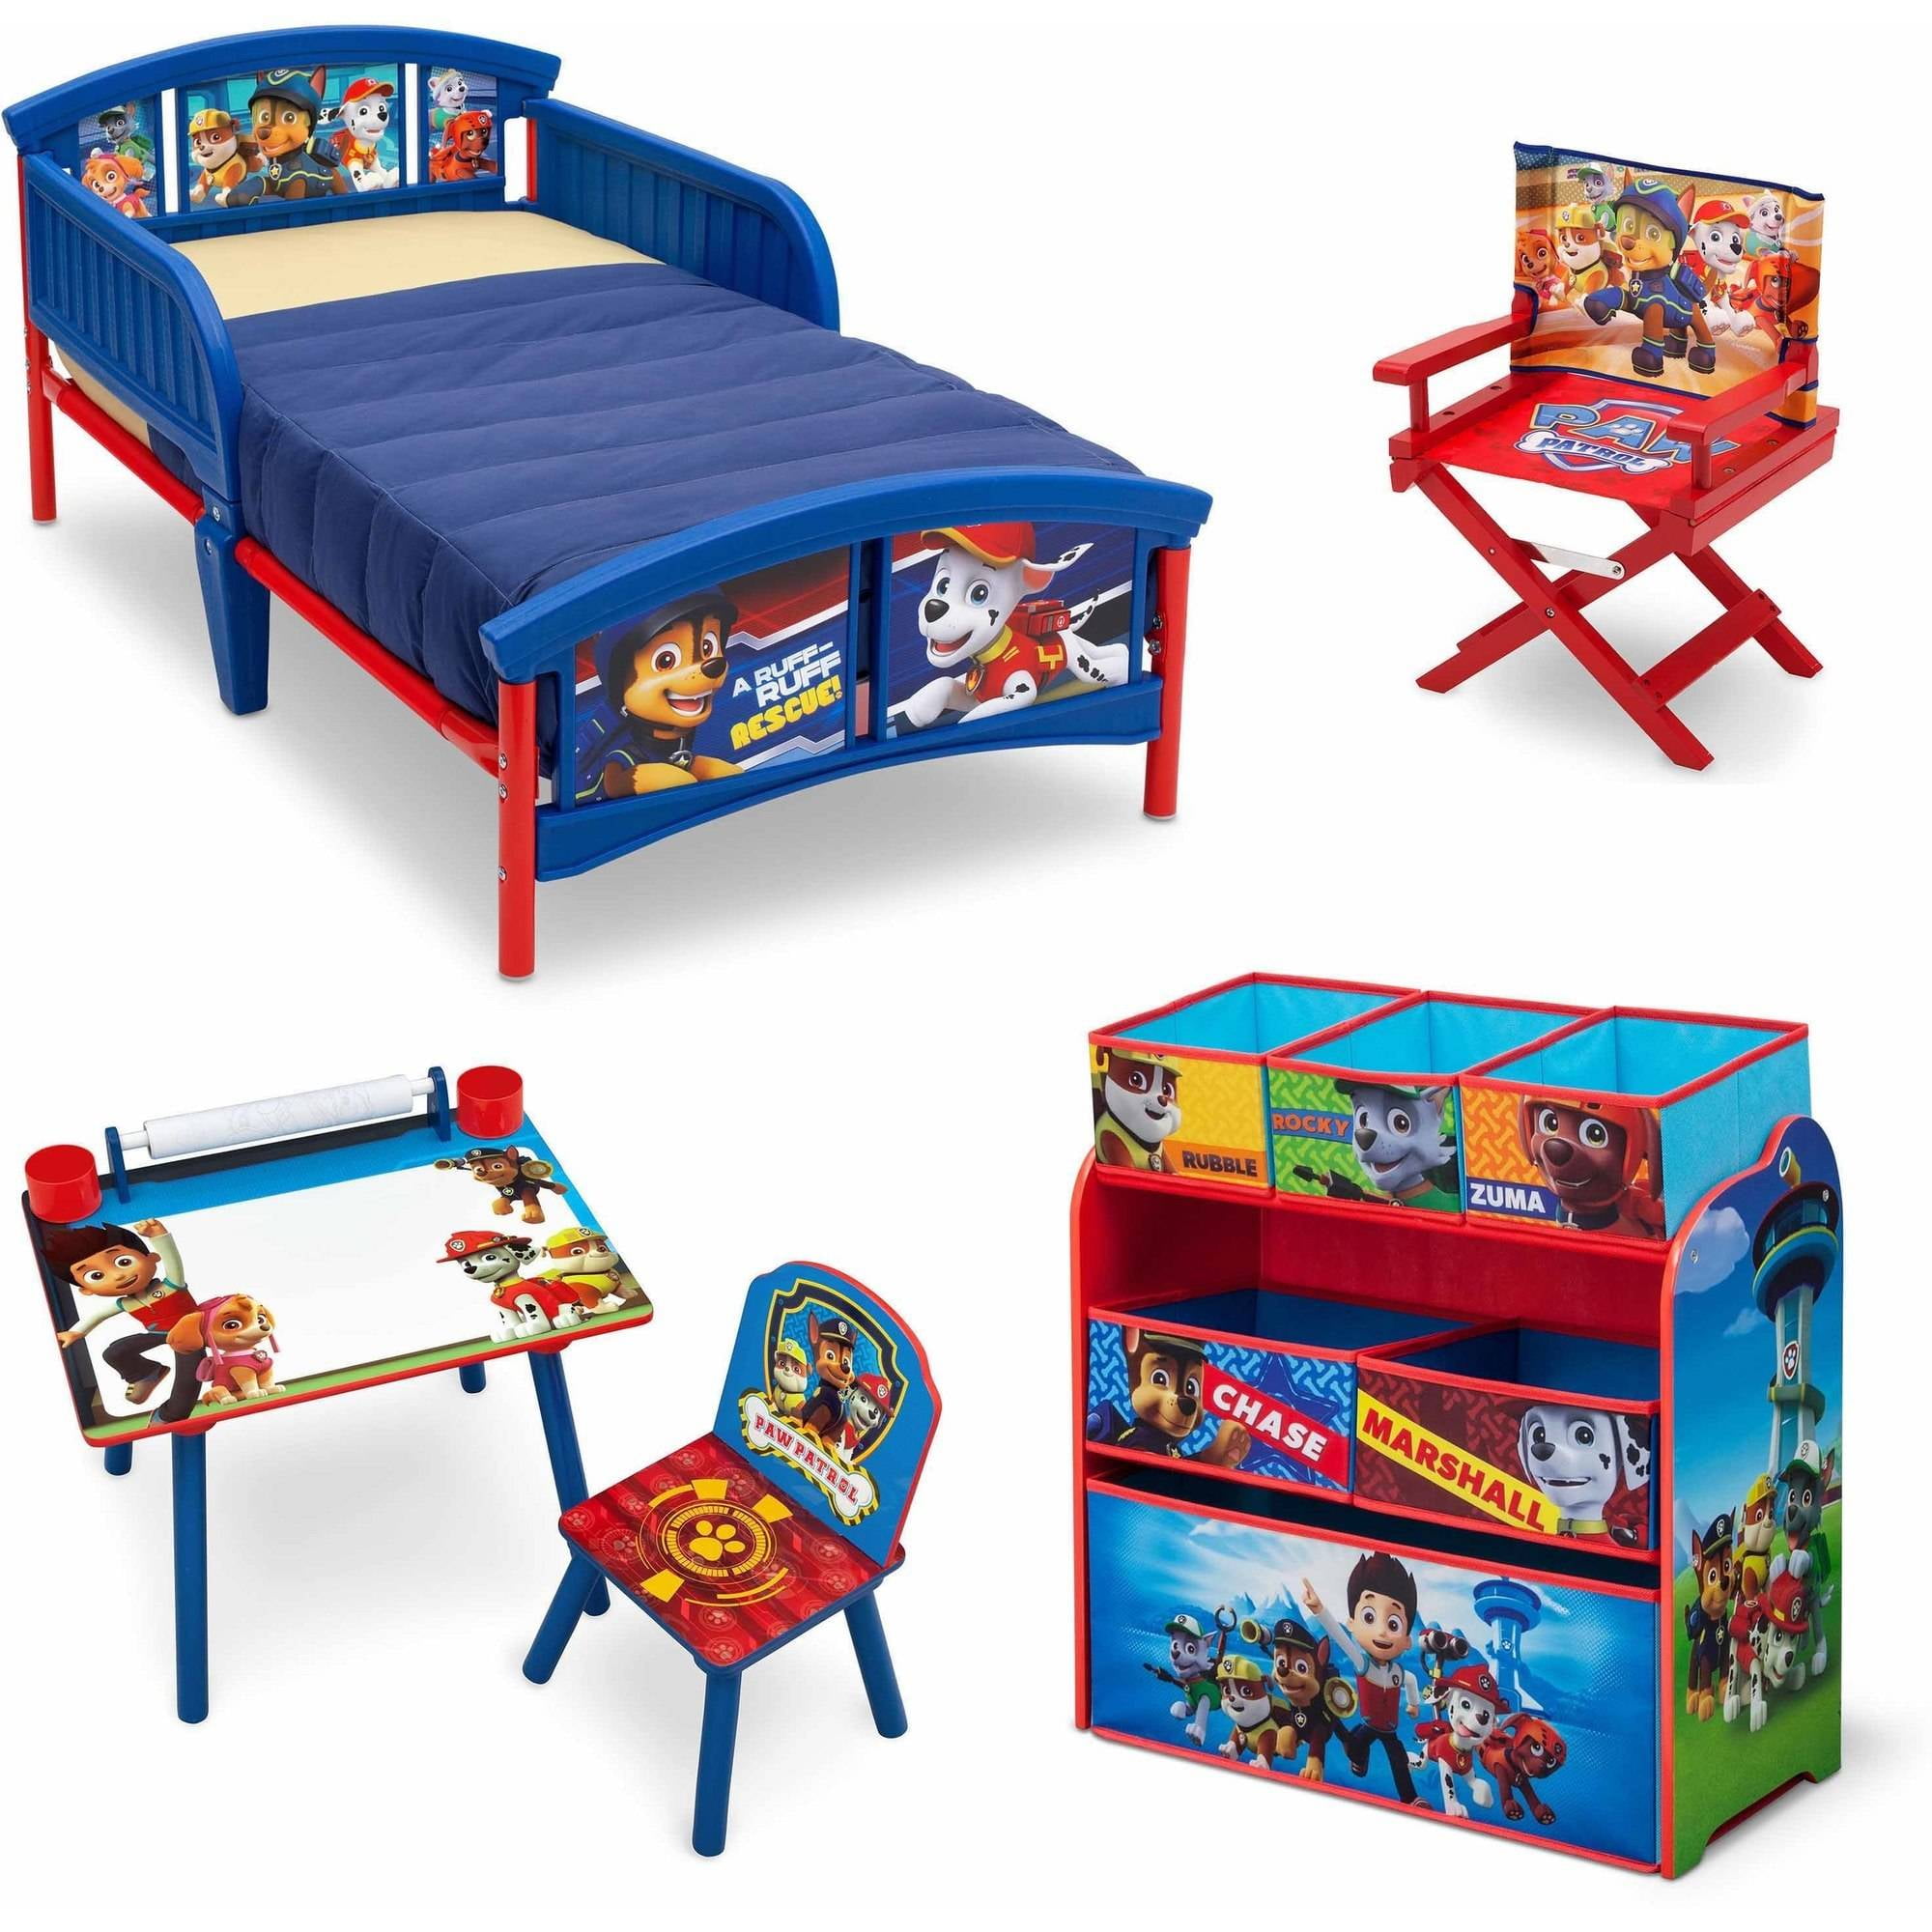 Room in a Box for Kids   Walmart.com